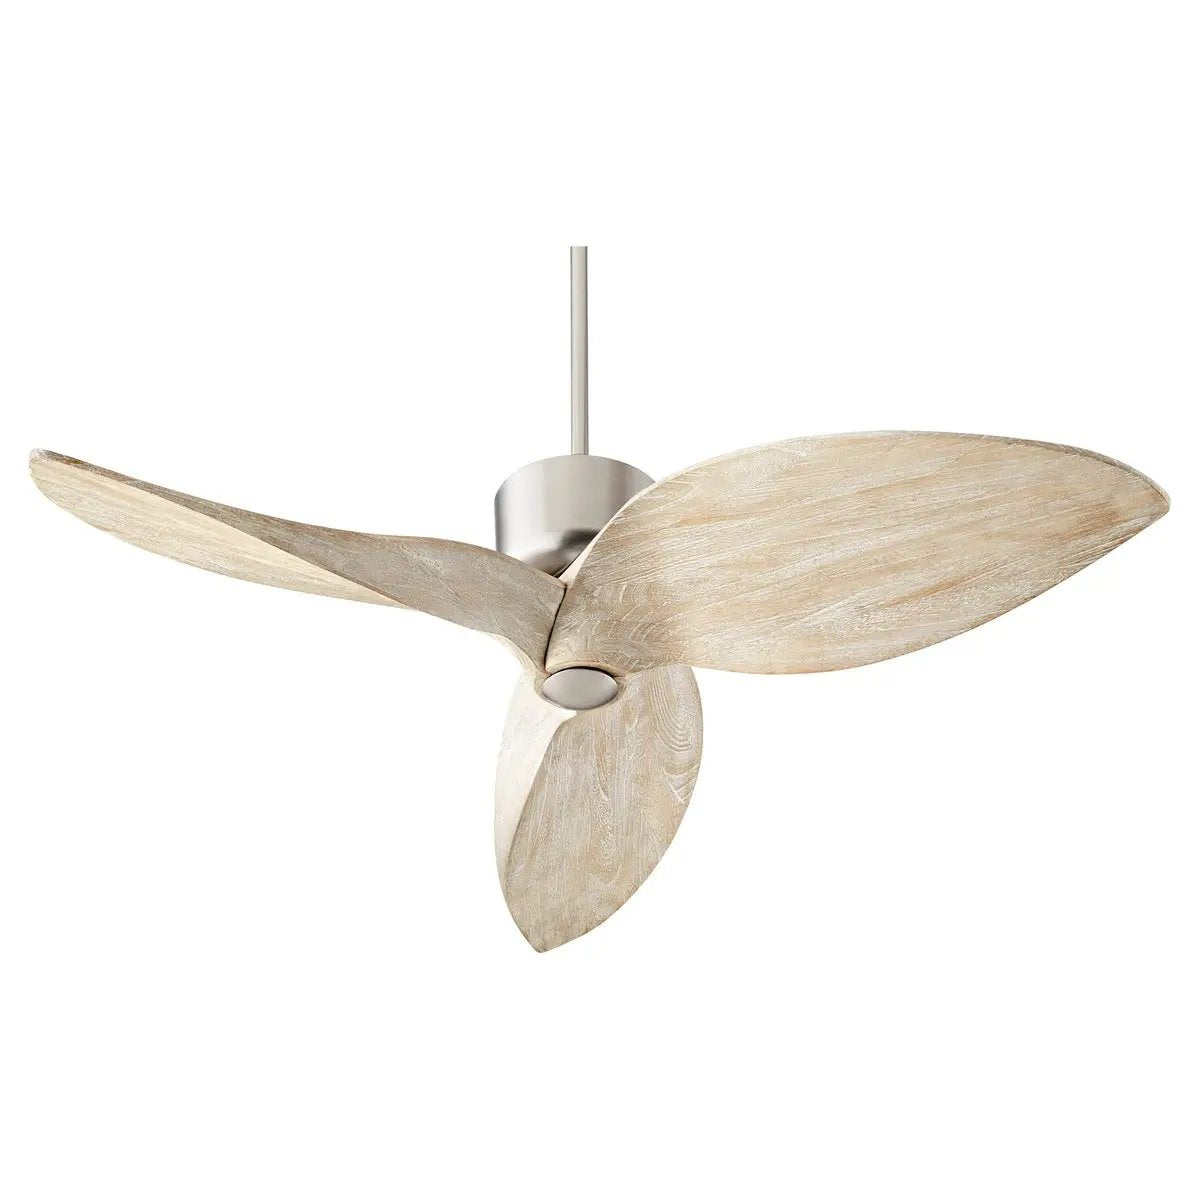 Contemporary Ceiling Fan with Distressed Finish and Weathered Oak Blades, perfect for boho-chic, eclectic, or modern farmhouse spaces. 52" blade sweep at a 45-degree pitch. DC-125NS-30 motor. UL Listed. Limited Lifetime Warranty.